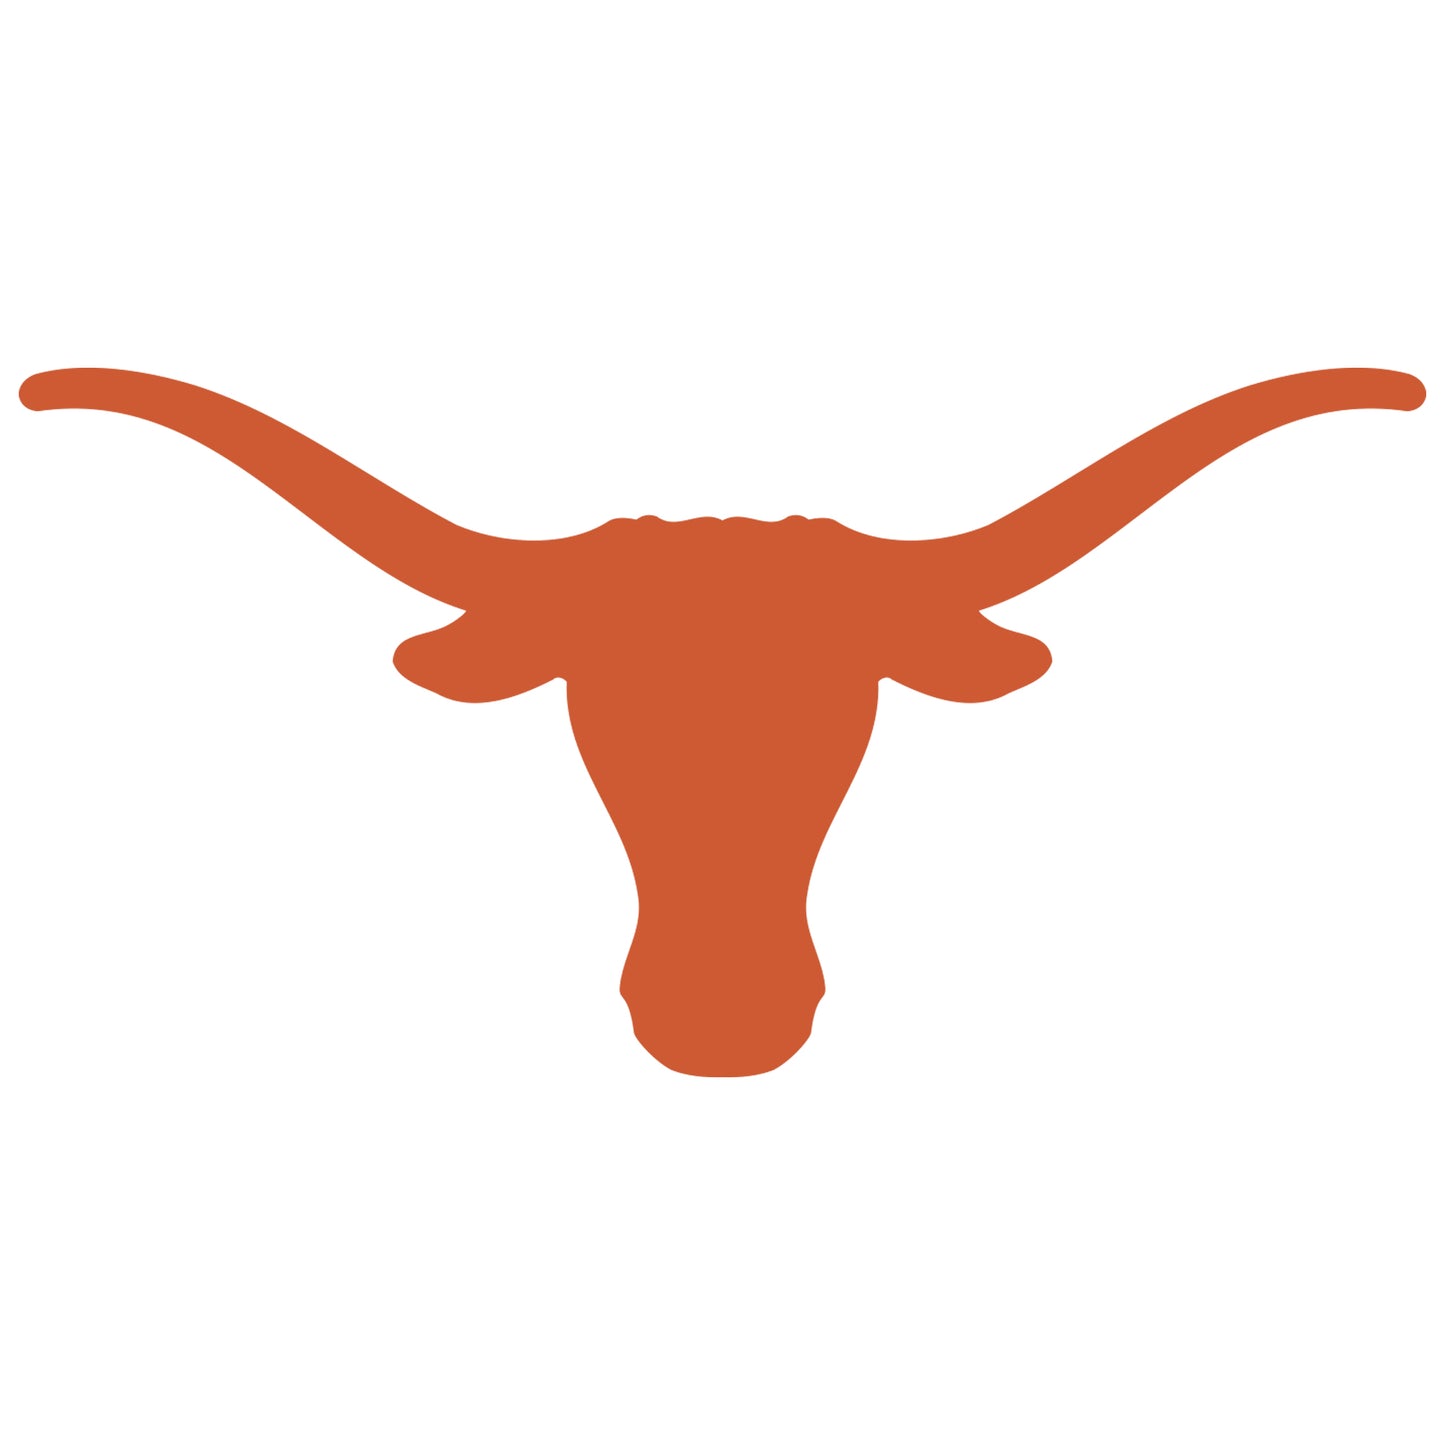 Sheet of 5 -U of Texas: Texas Longhorns  Logo Minis        - Officially Licensed NCAA Removable    Adhesive Decal